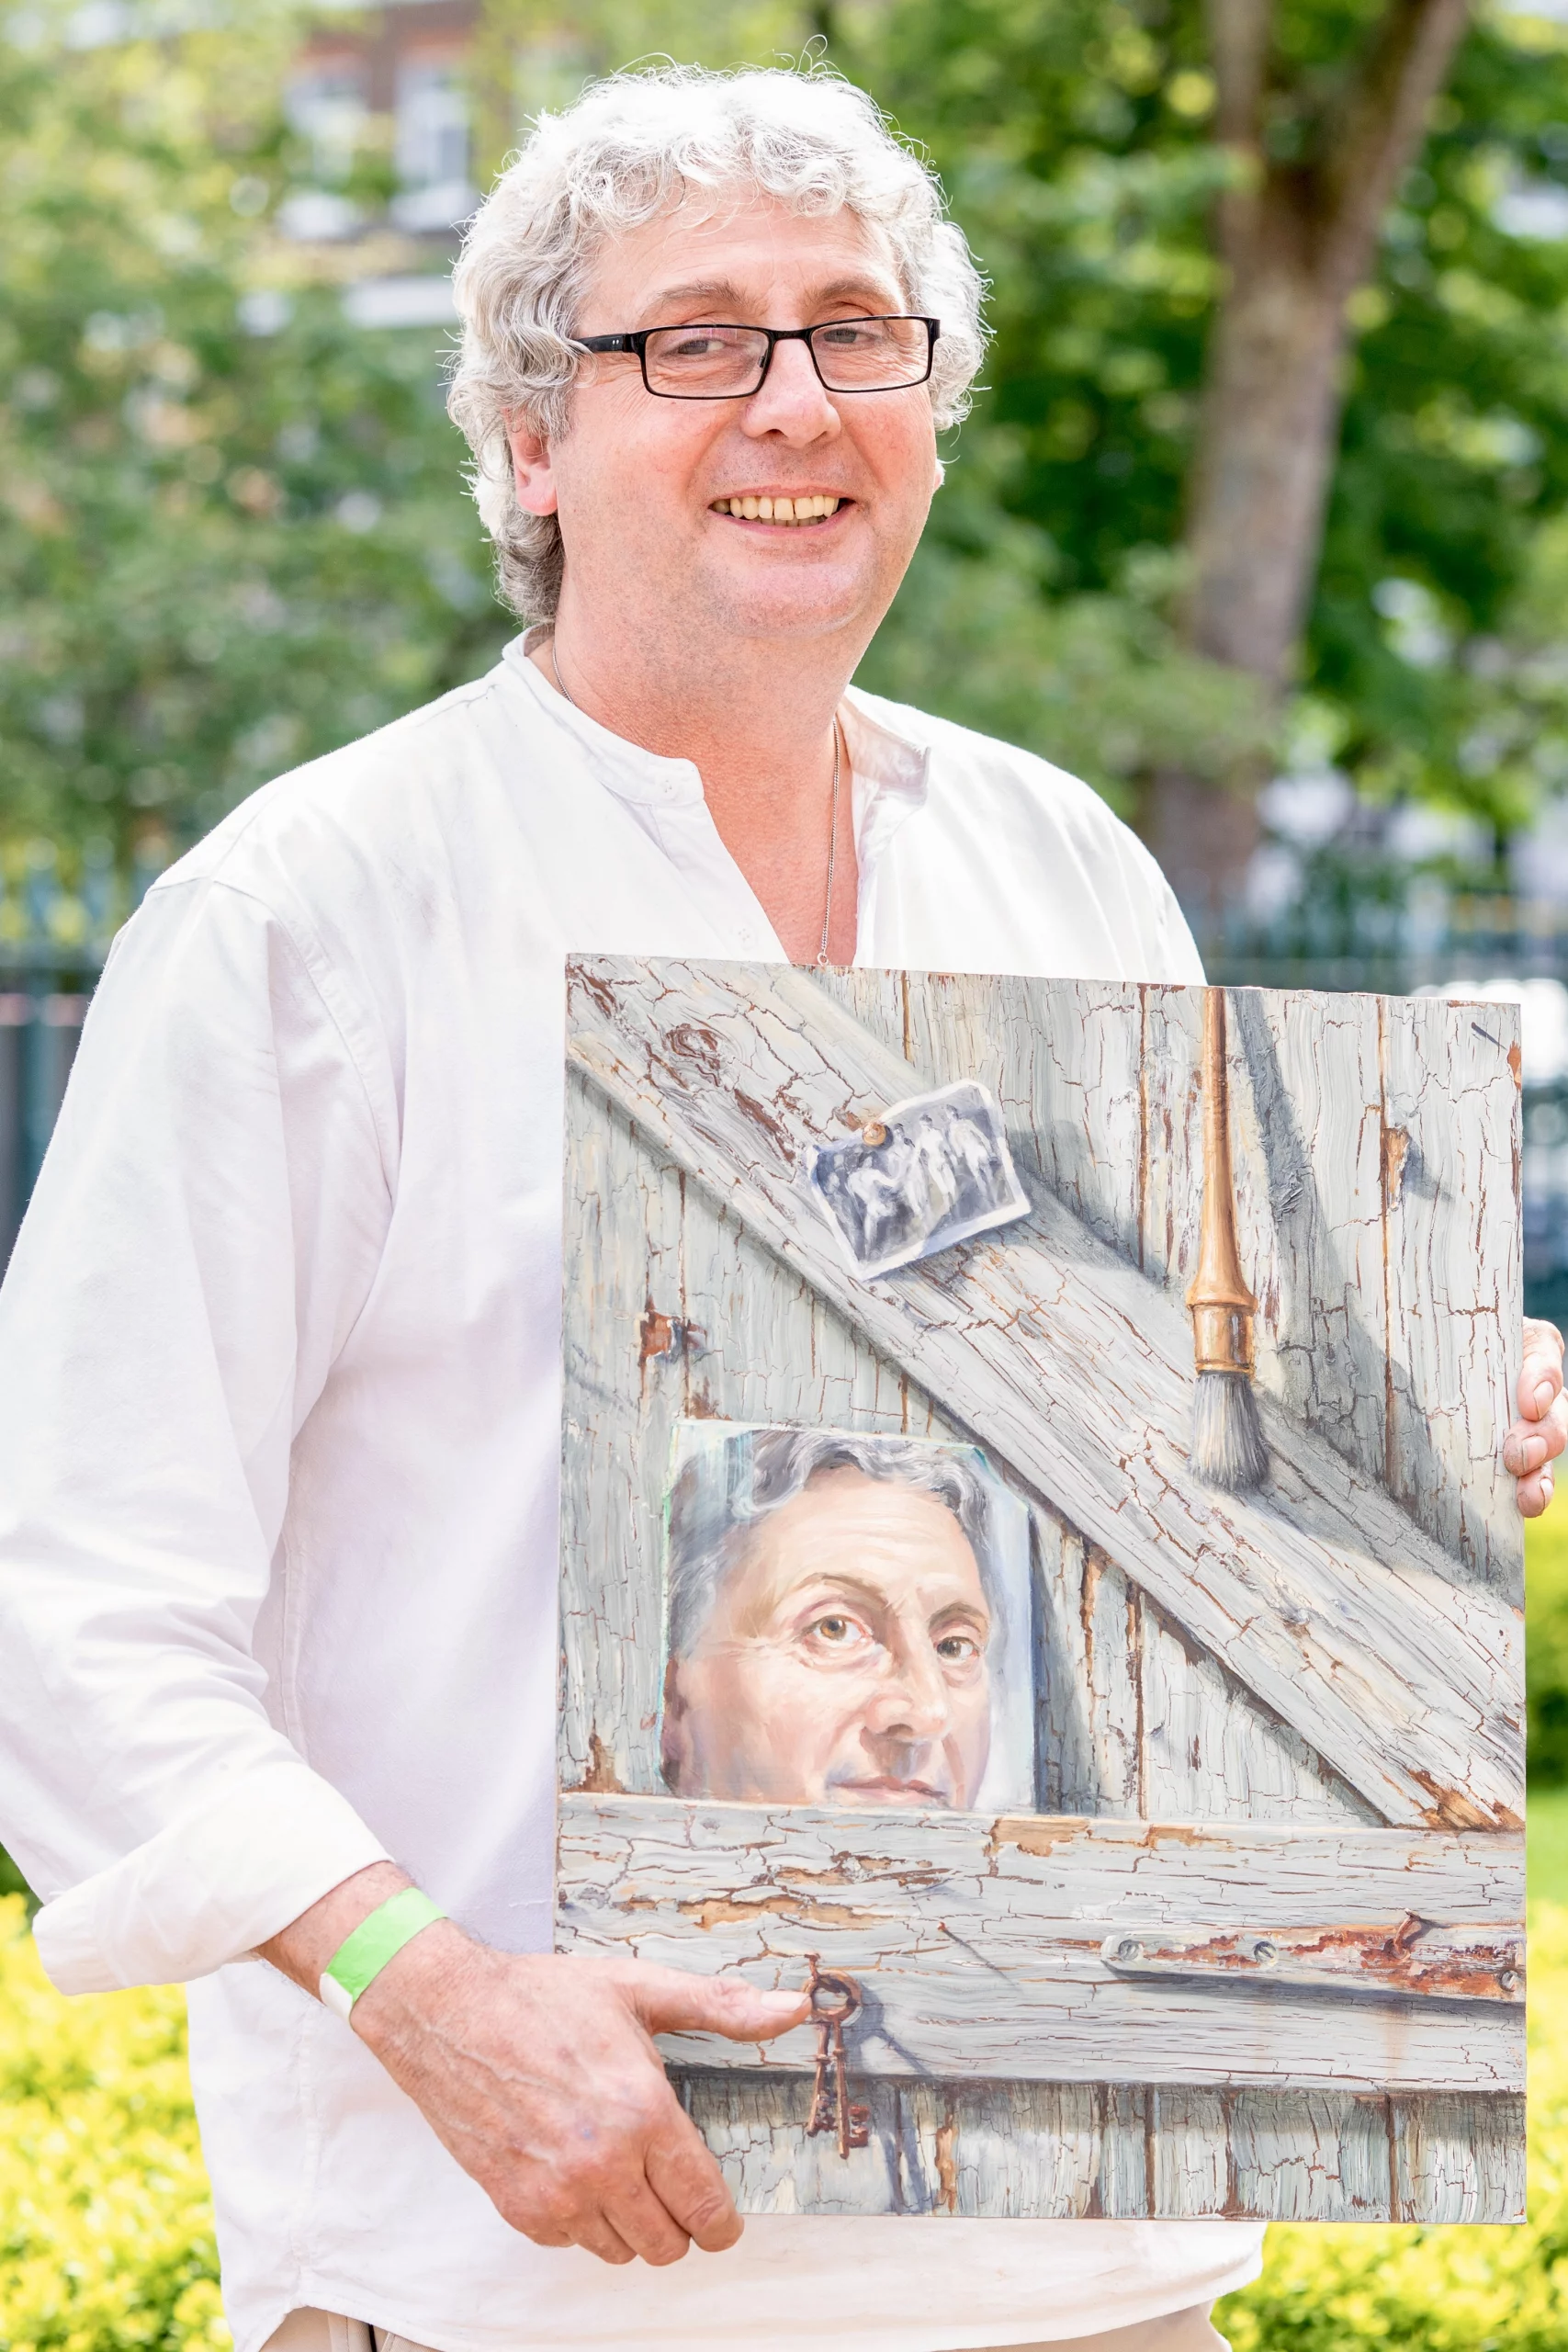 Colin-Pethick Portrait artist of the year series 2019